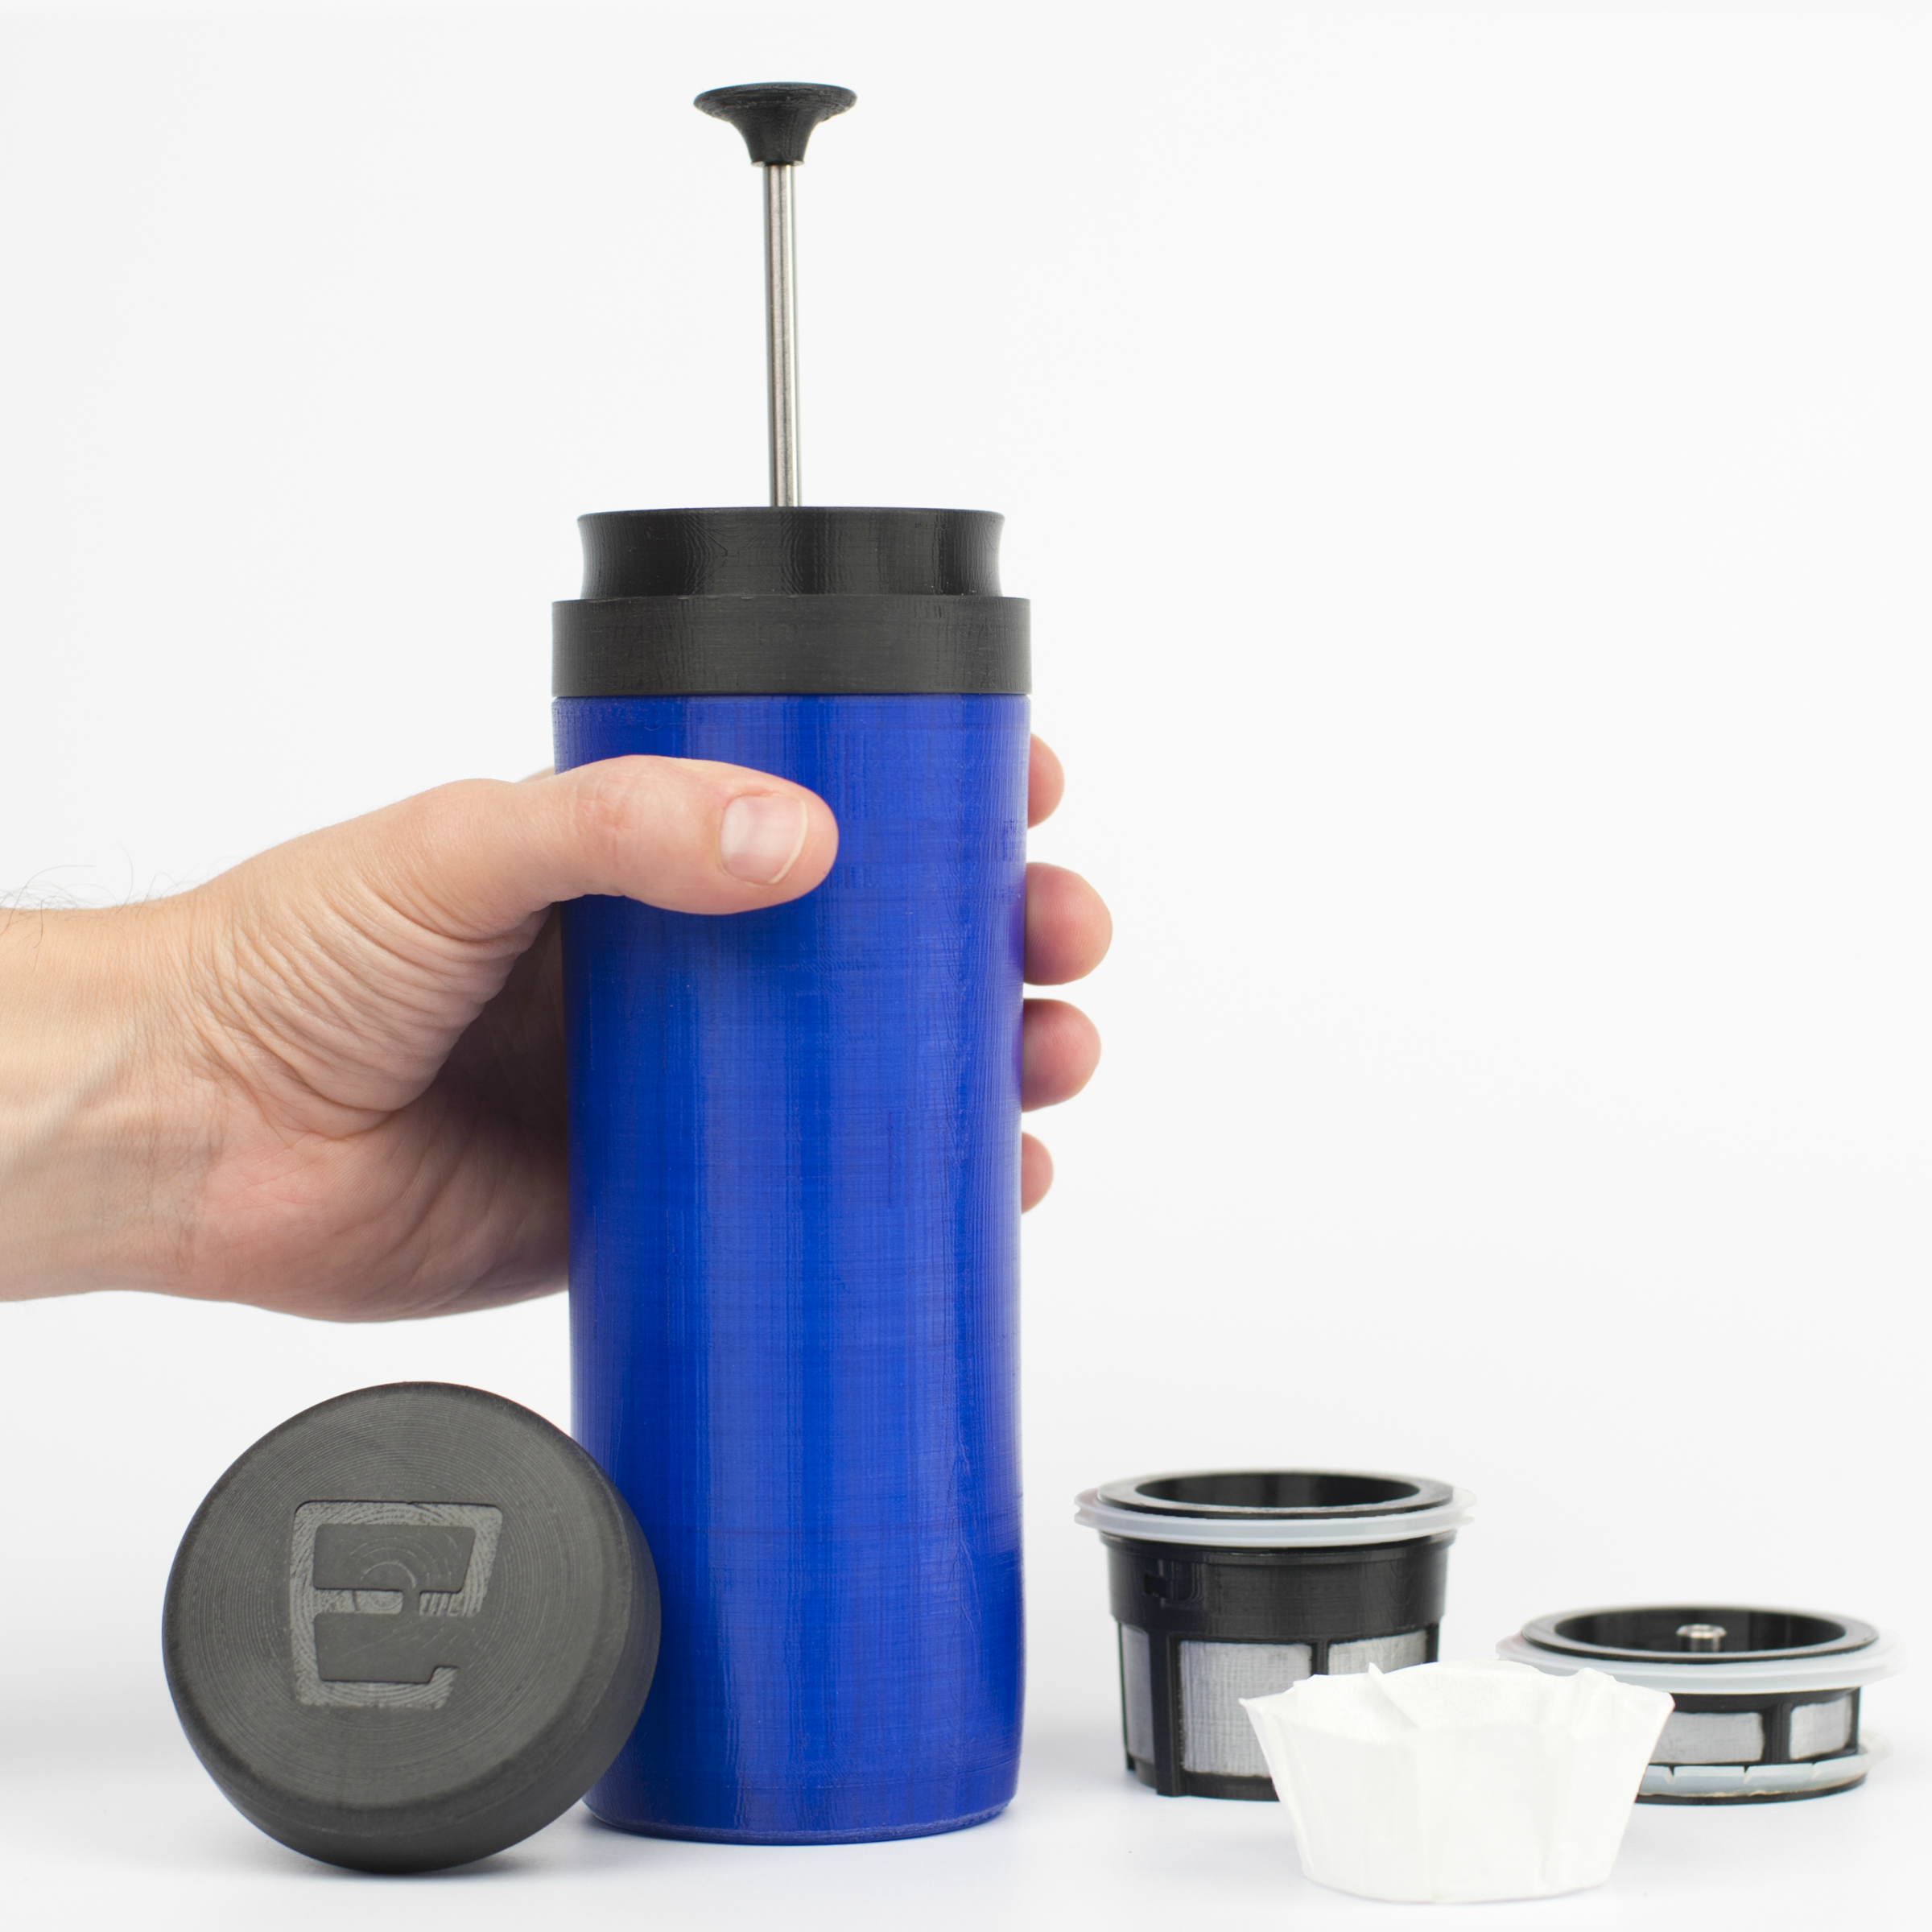 the espro travel press by bruce constantine.